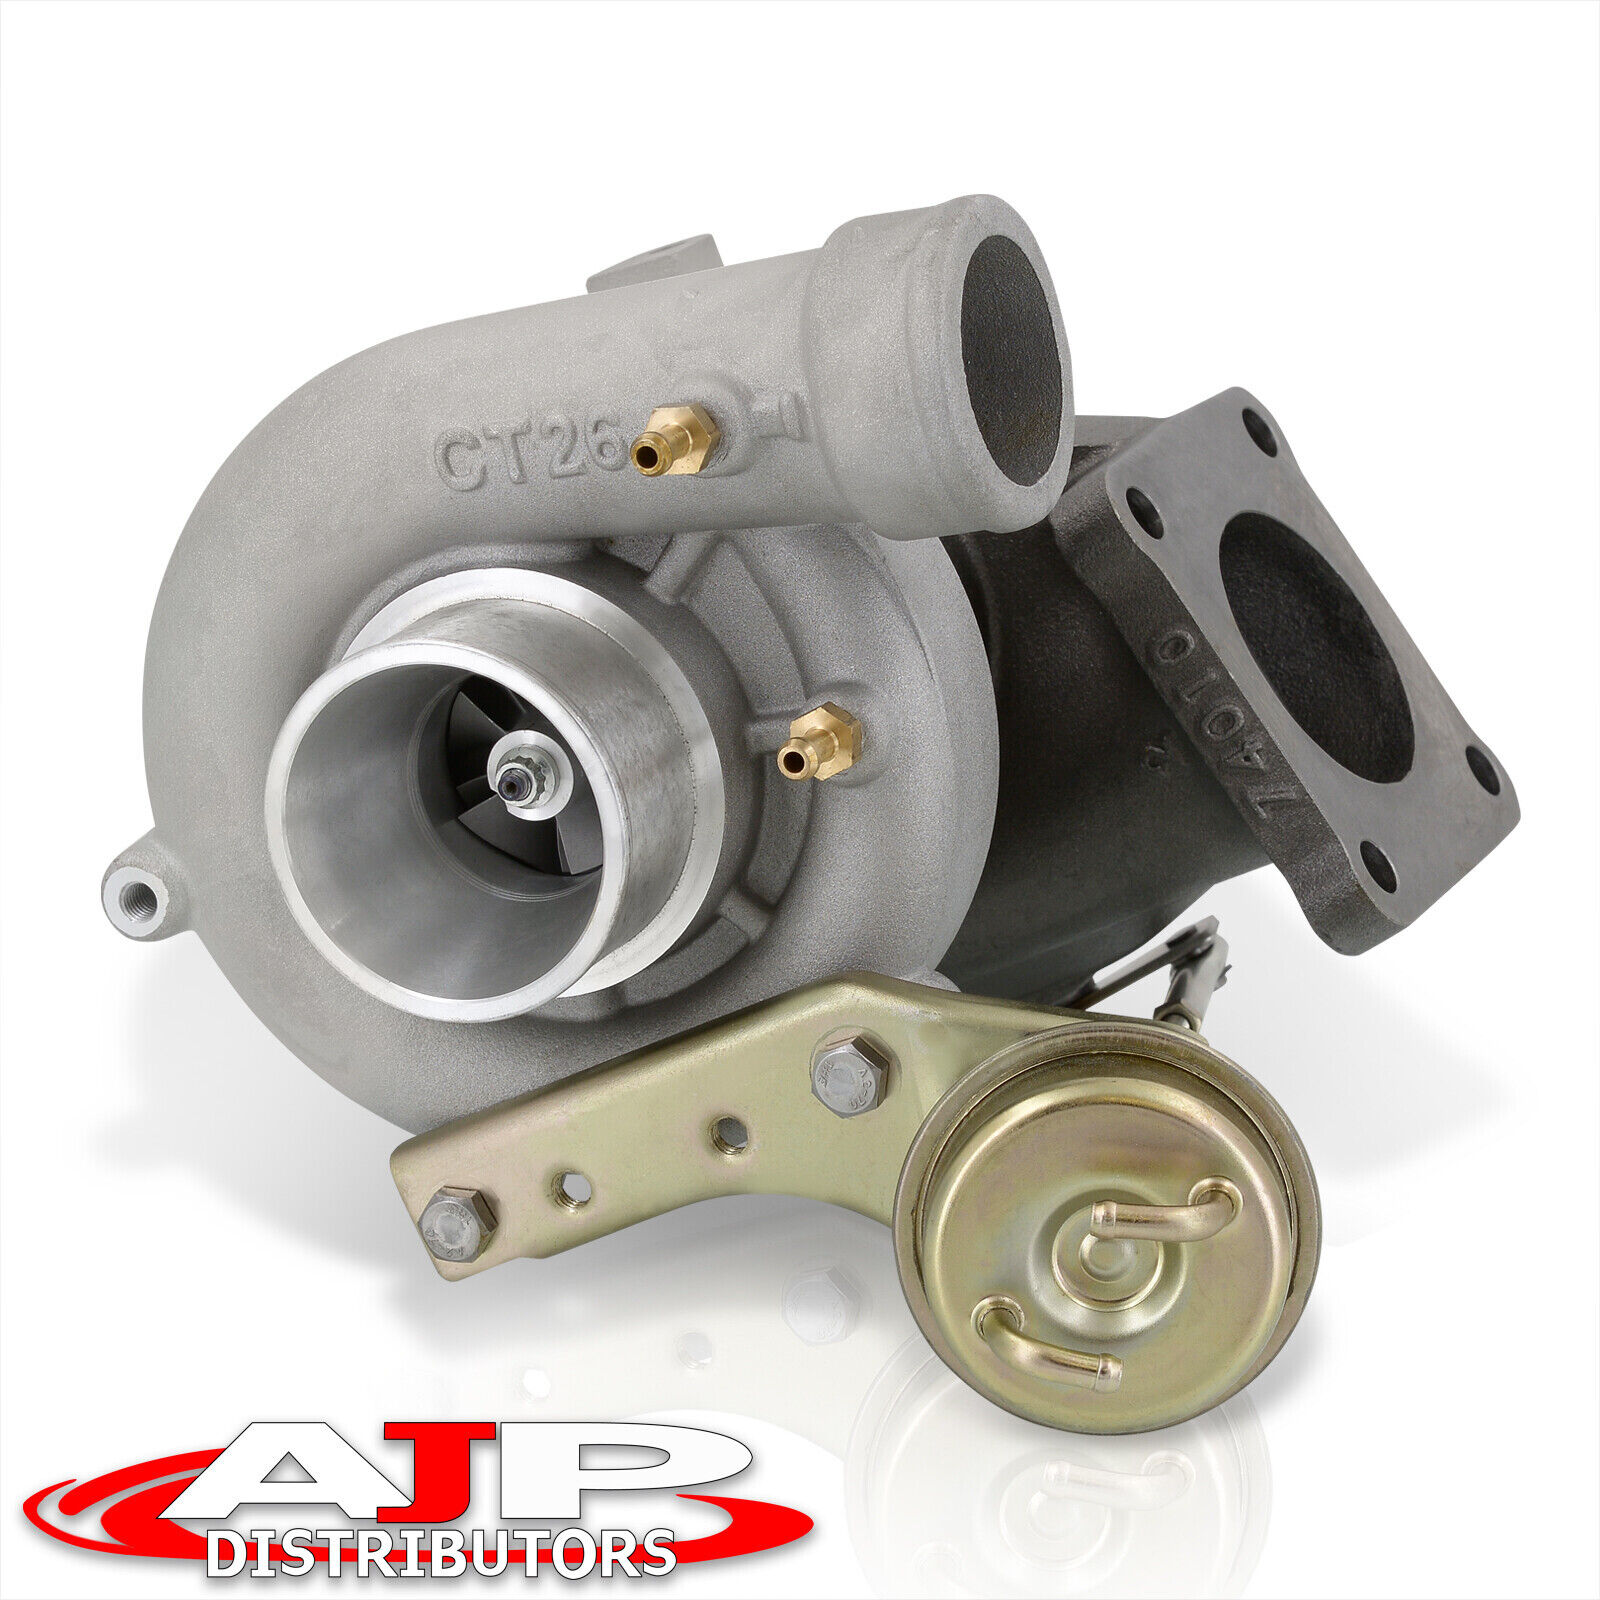 JDM Replacement CT26 Turbo Charger For 1986-1989 Toyota Celica ST165 4WD 3S-GTE